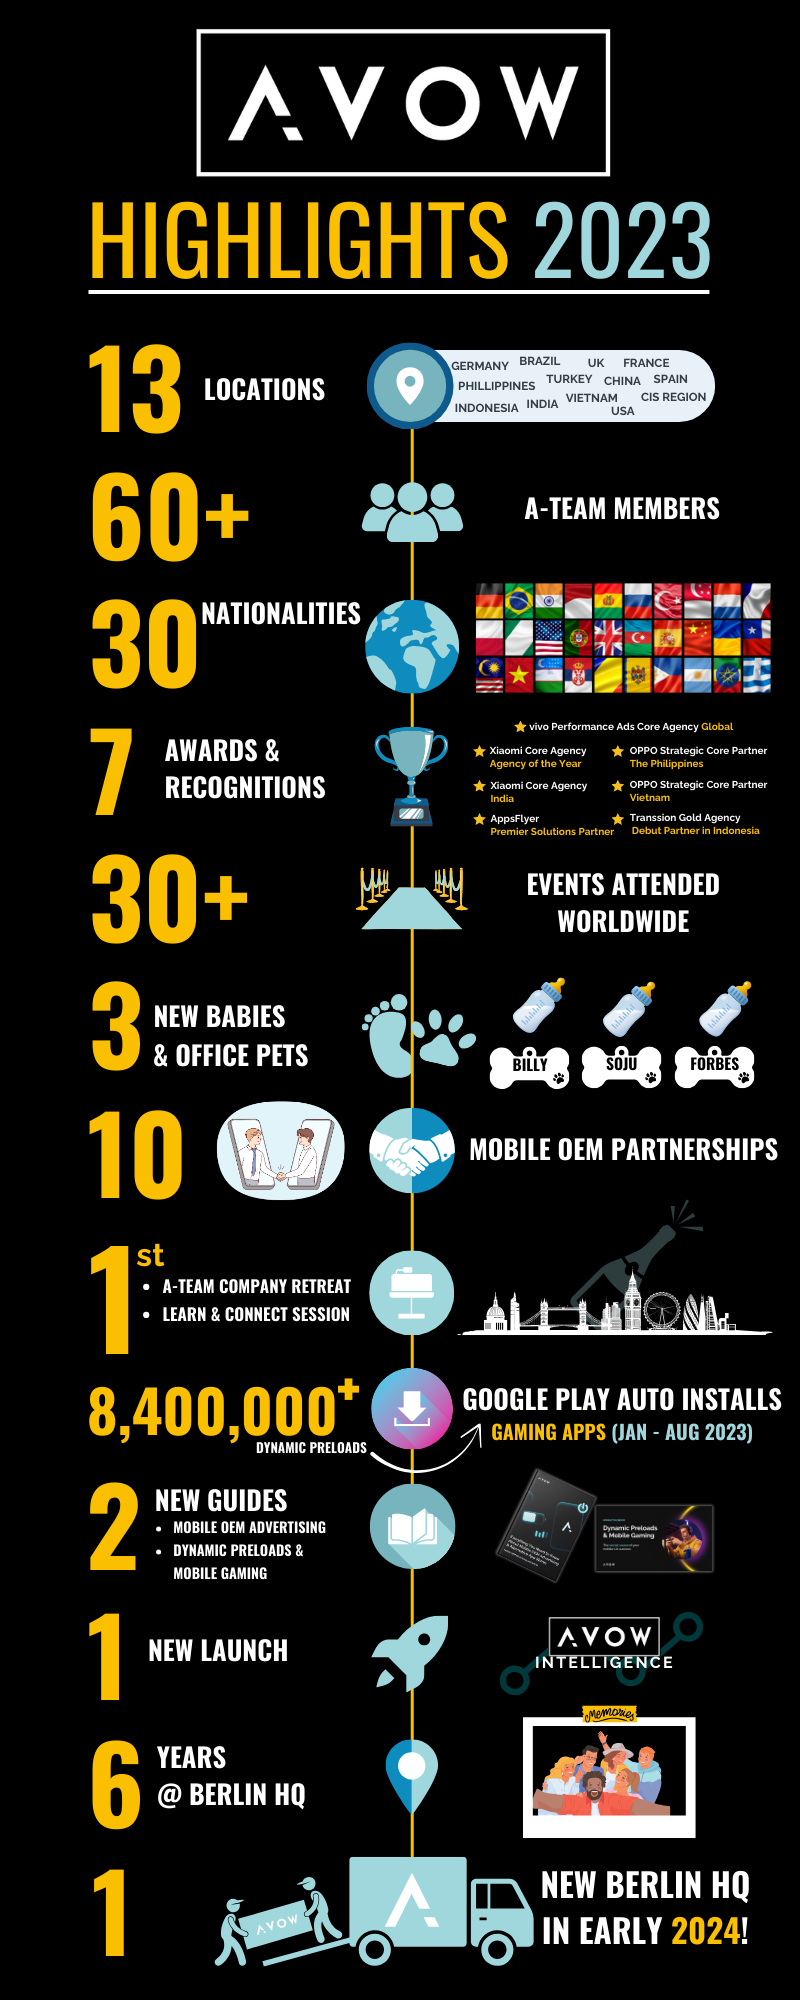 AVOW's 2023 Highlights Infographic: A Journey of Global Expansion, Recognitions, and Celebrations